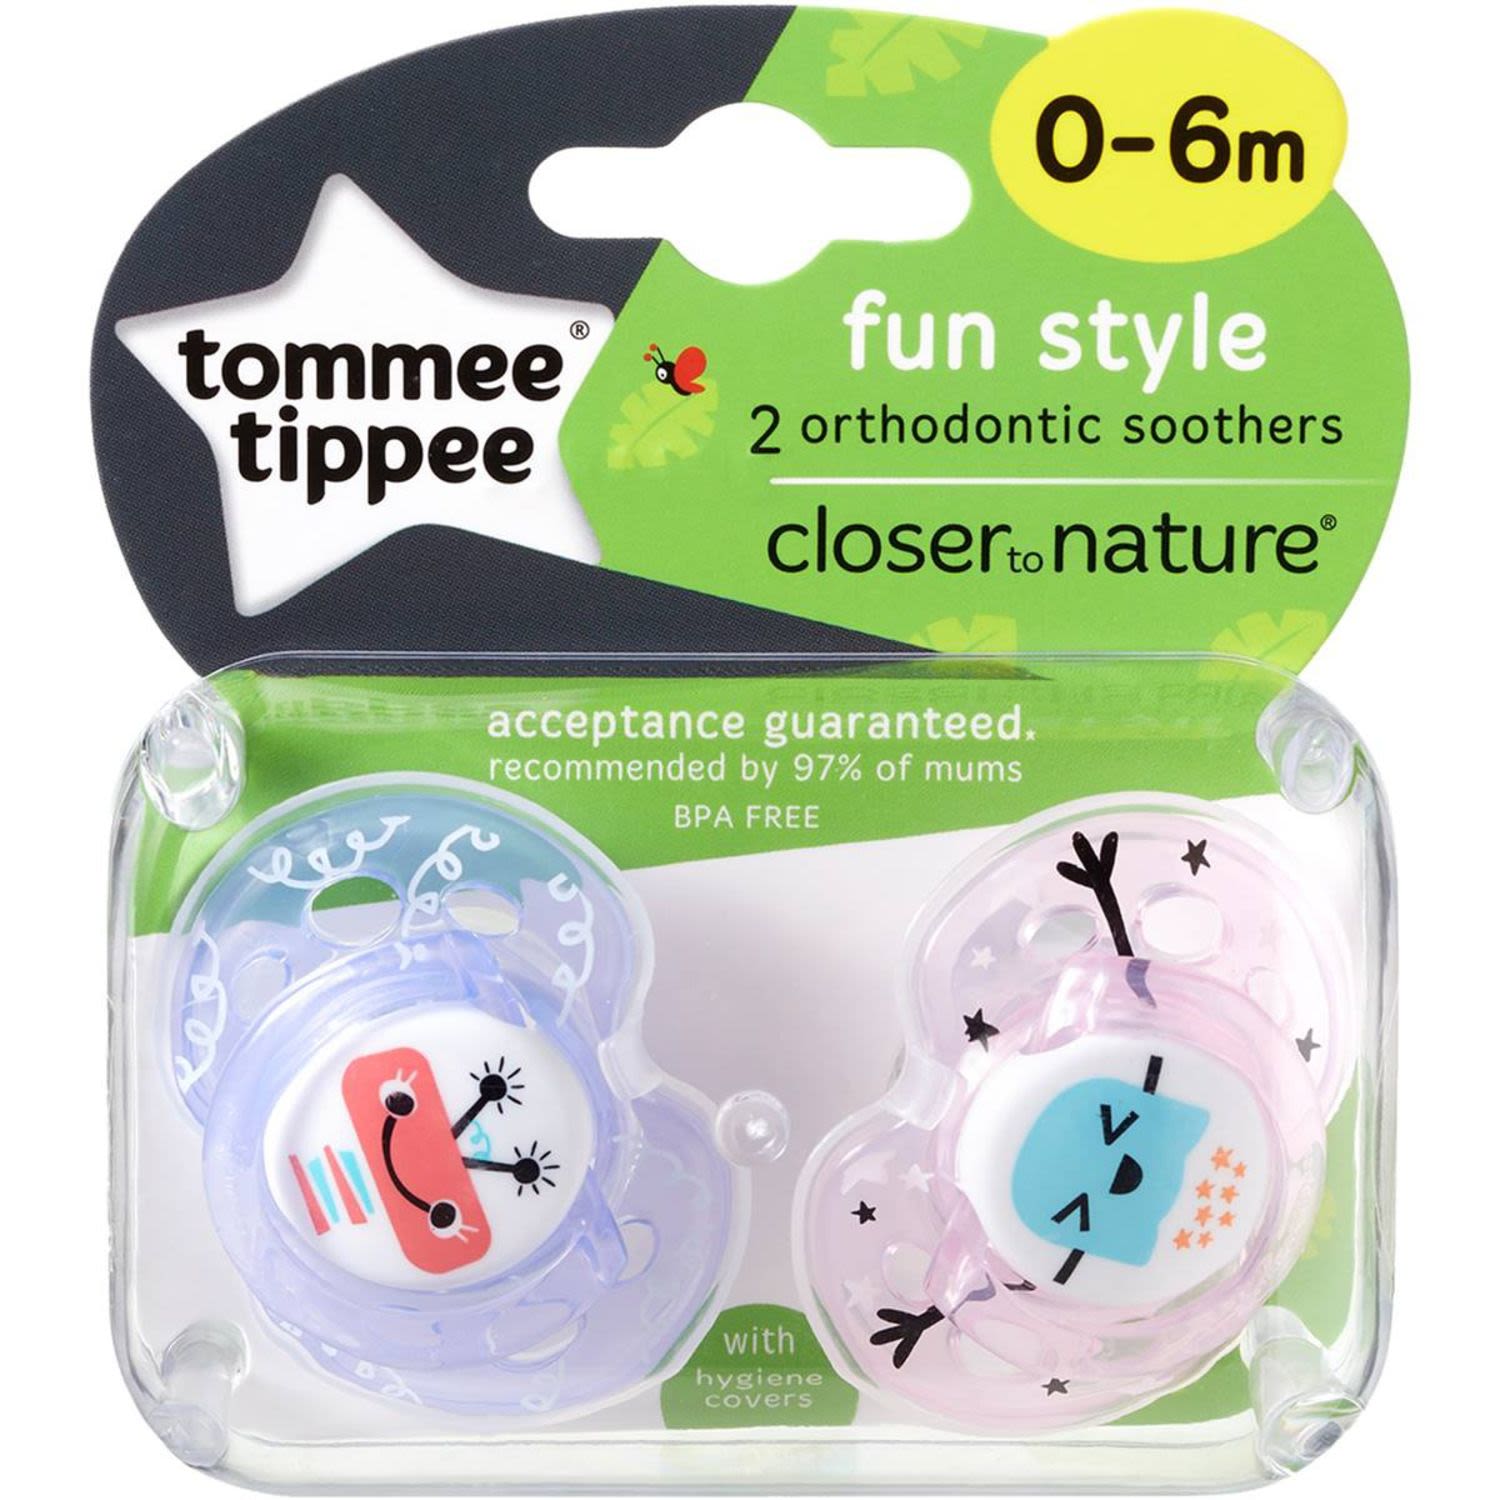 Tommee Tippee Closer To Nature Fun Style Soothers 0 To 6 Months, 2 Each